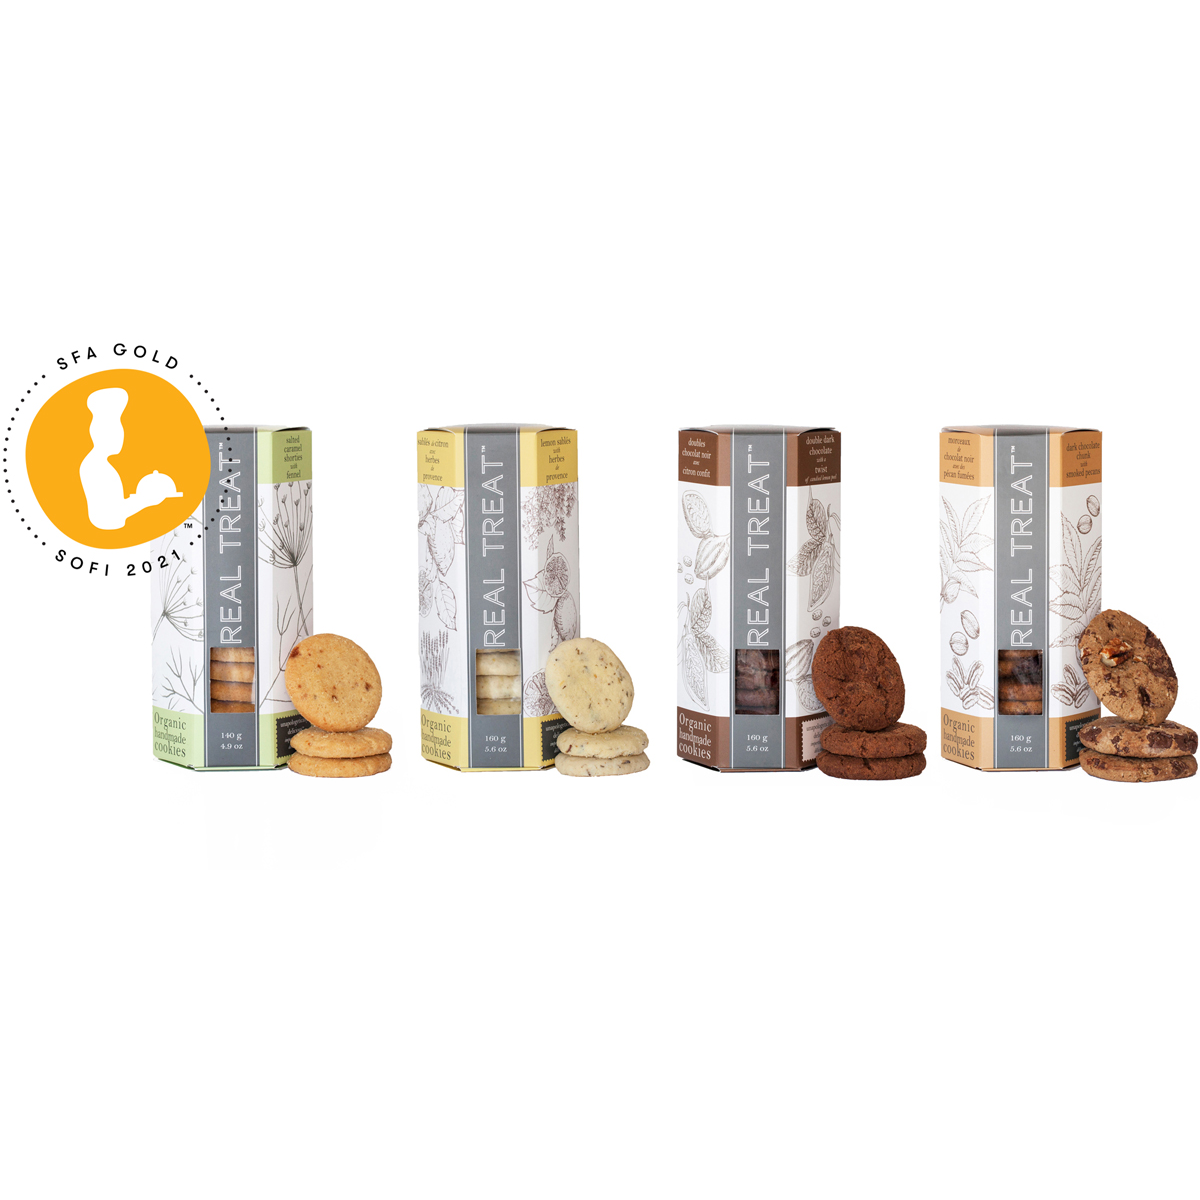 Packages of all four flavours of the Real Treat Top Shelf cookie line